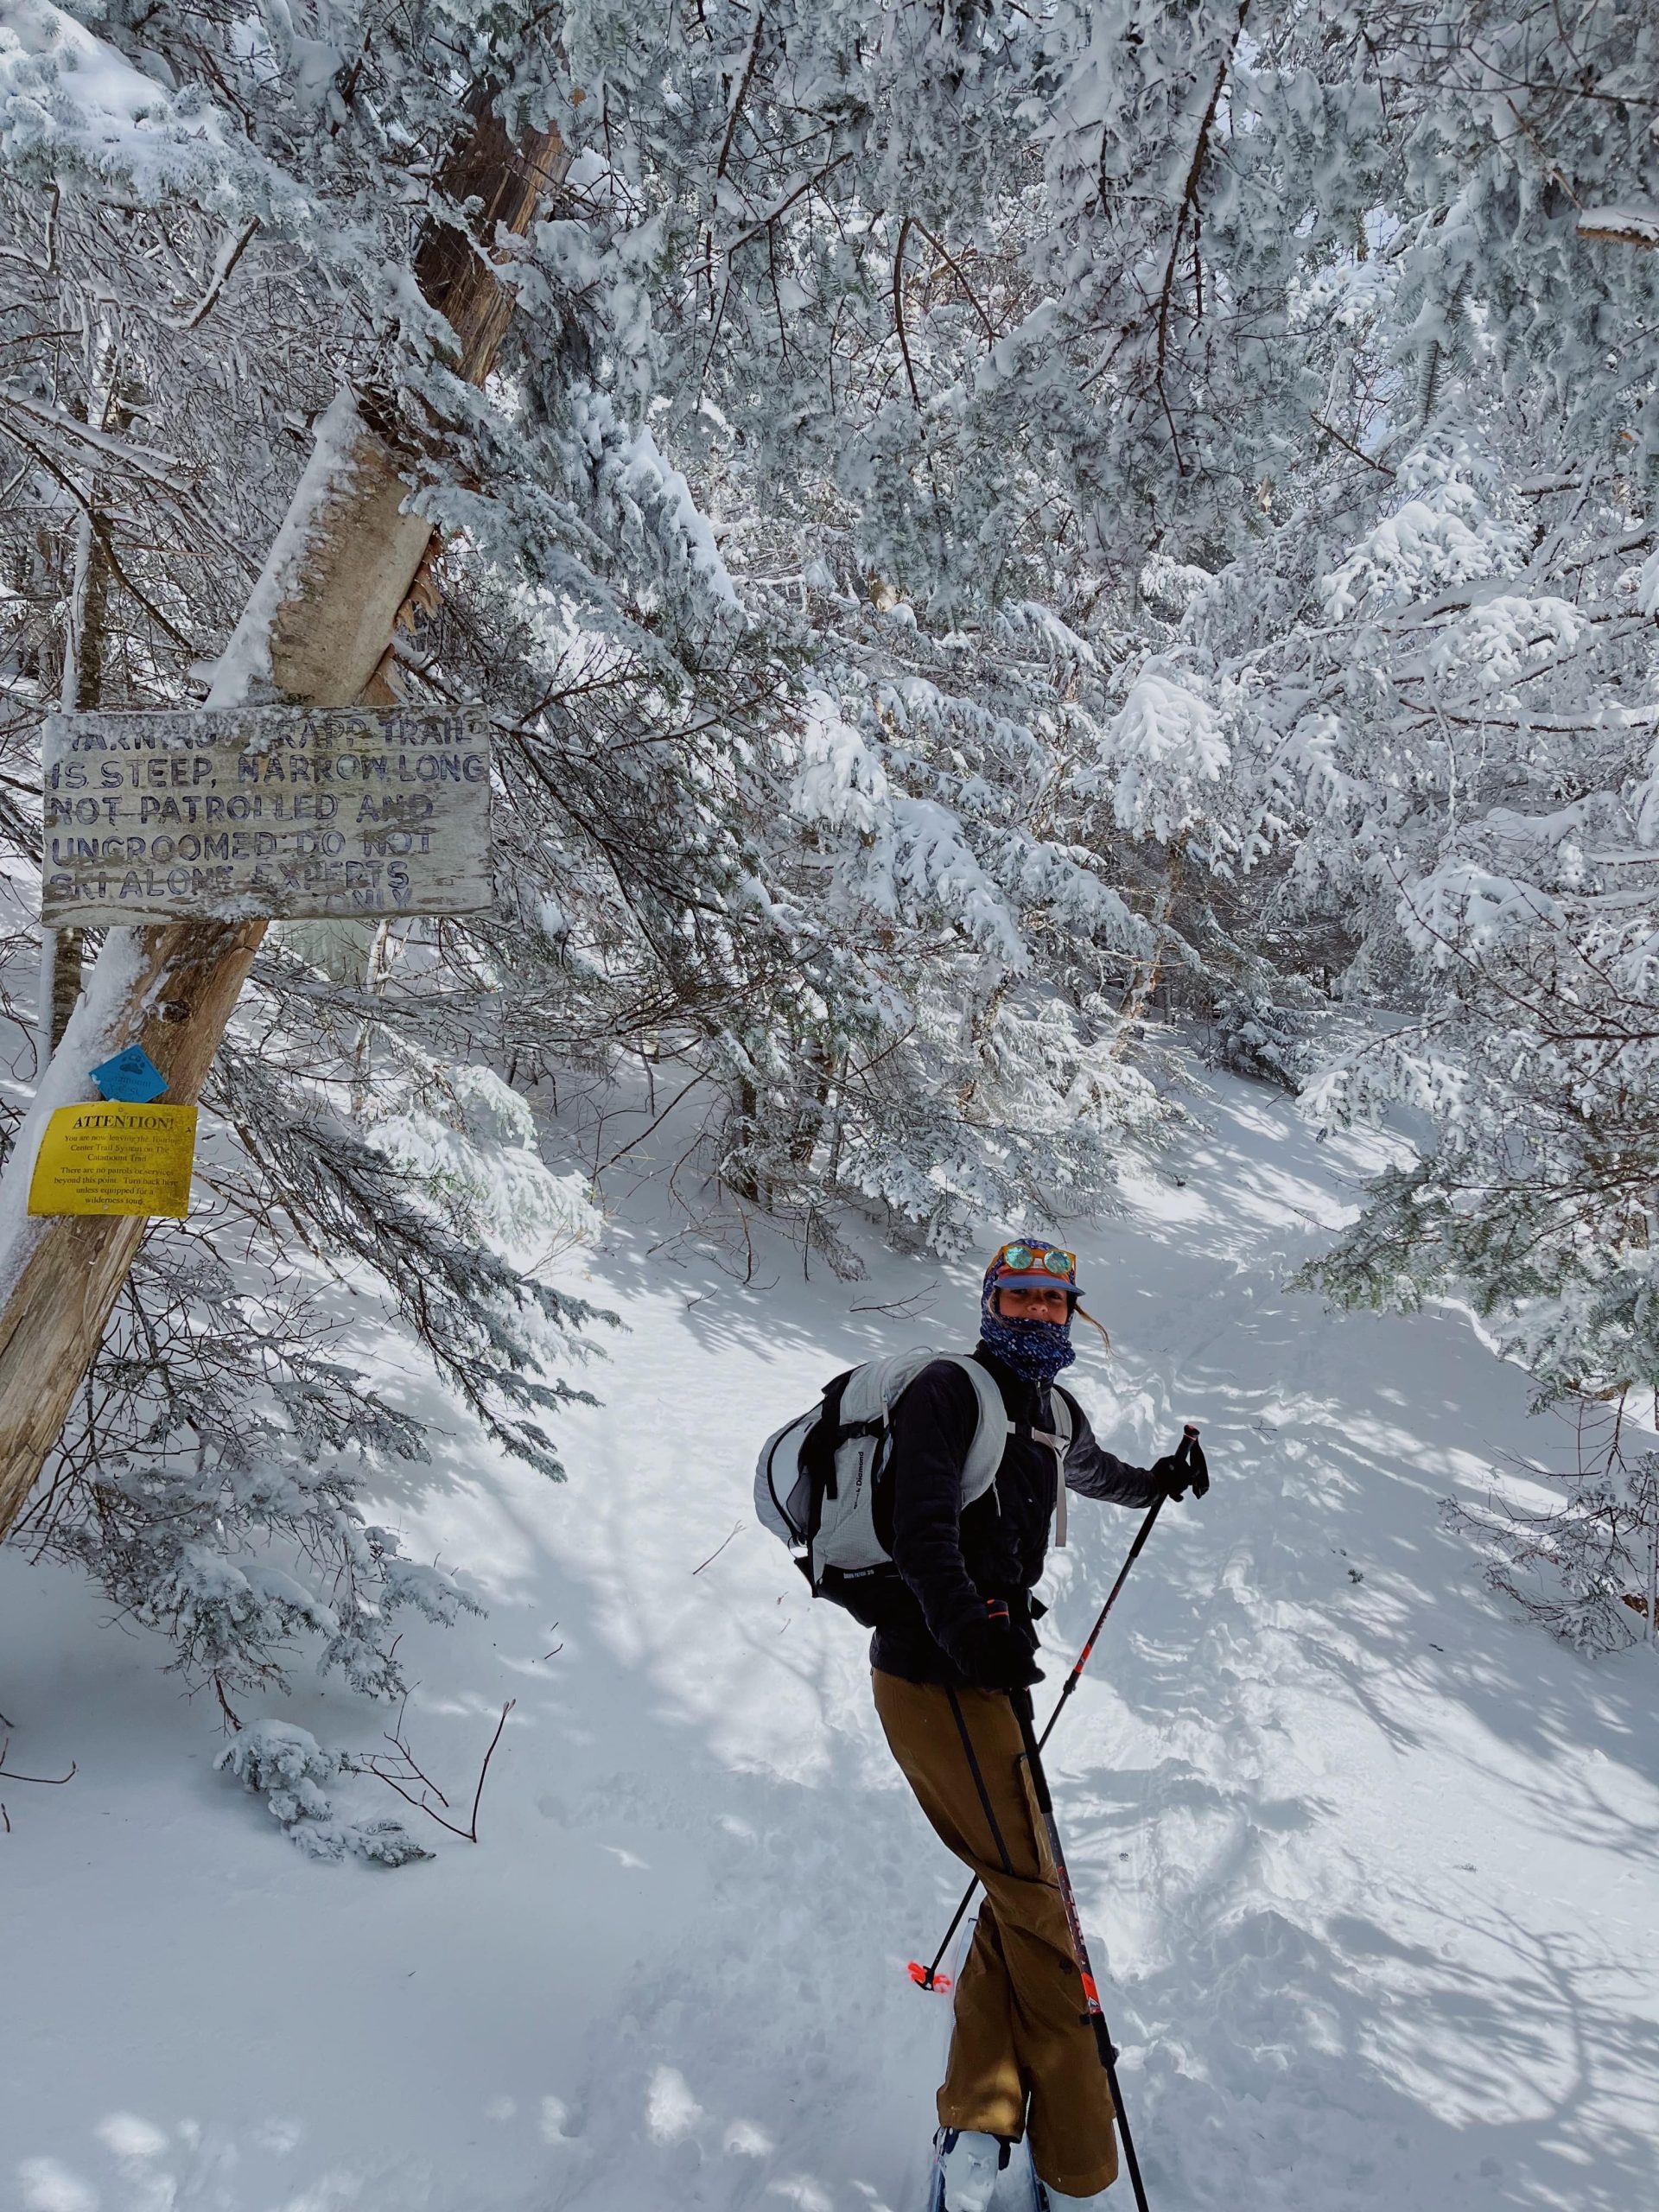 Backcountry ski trails at Bolton, leading up to the highest point on the catamount trail